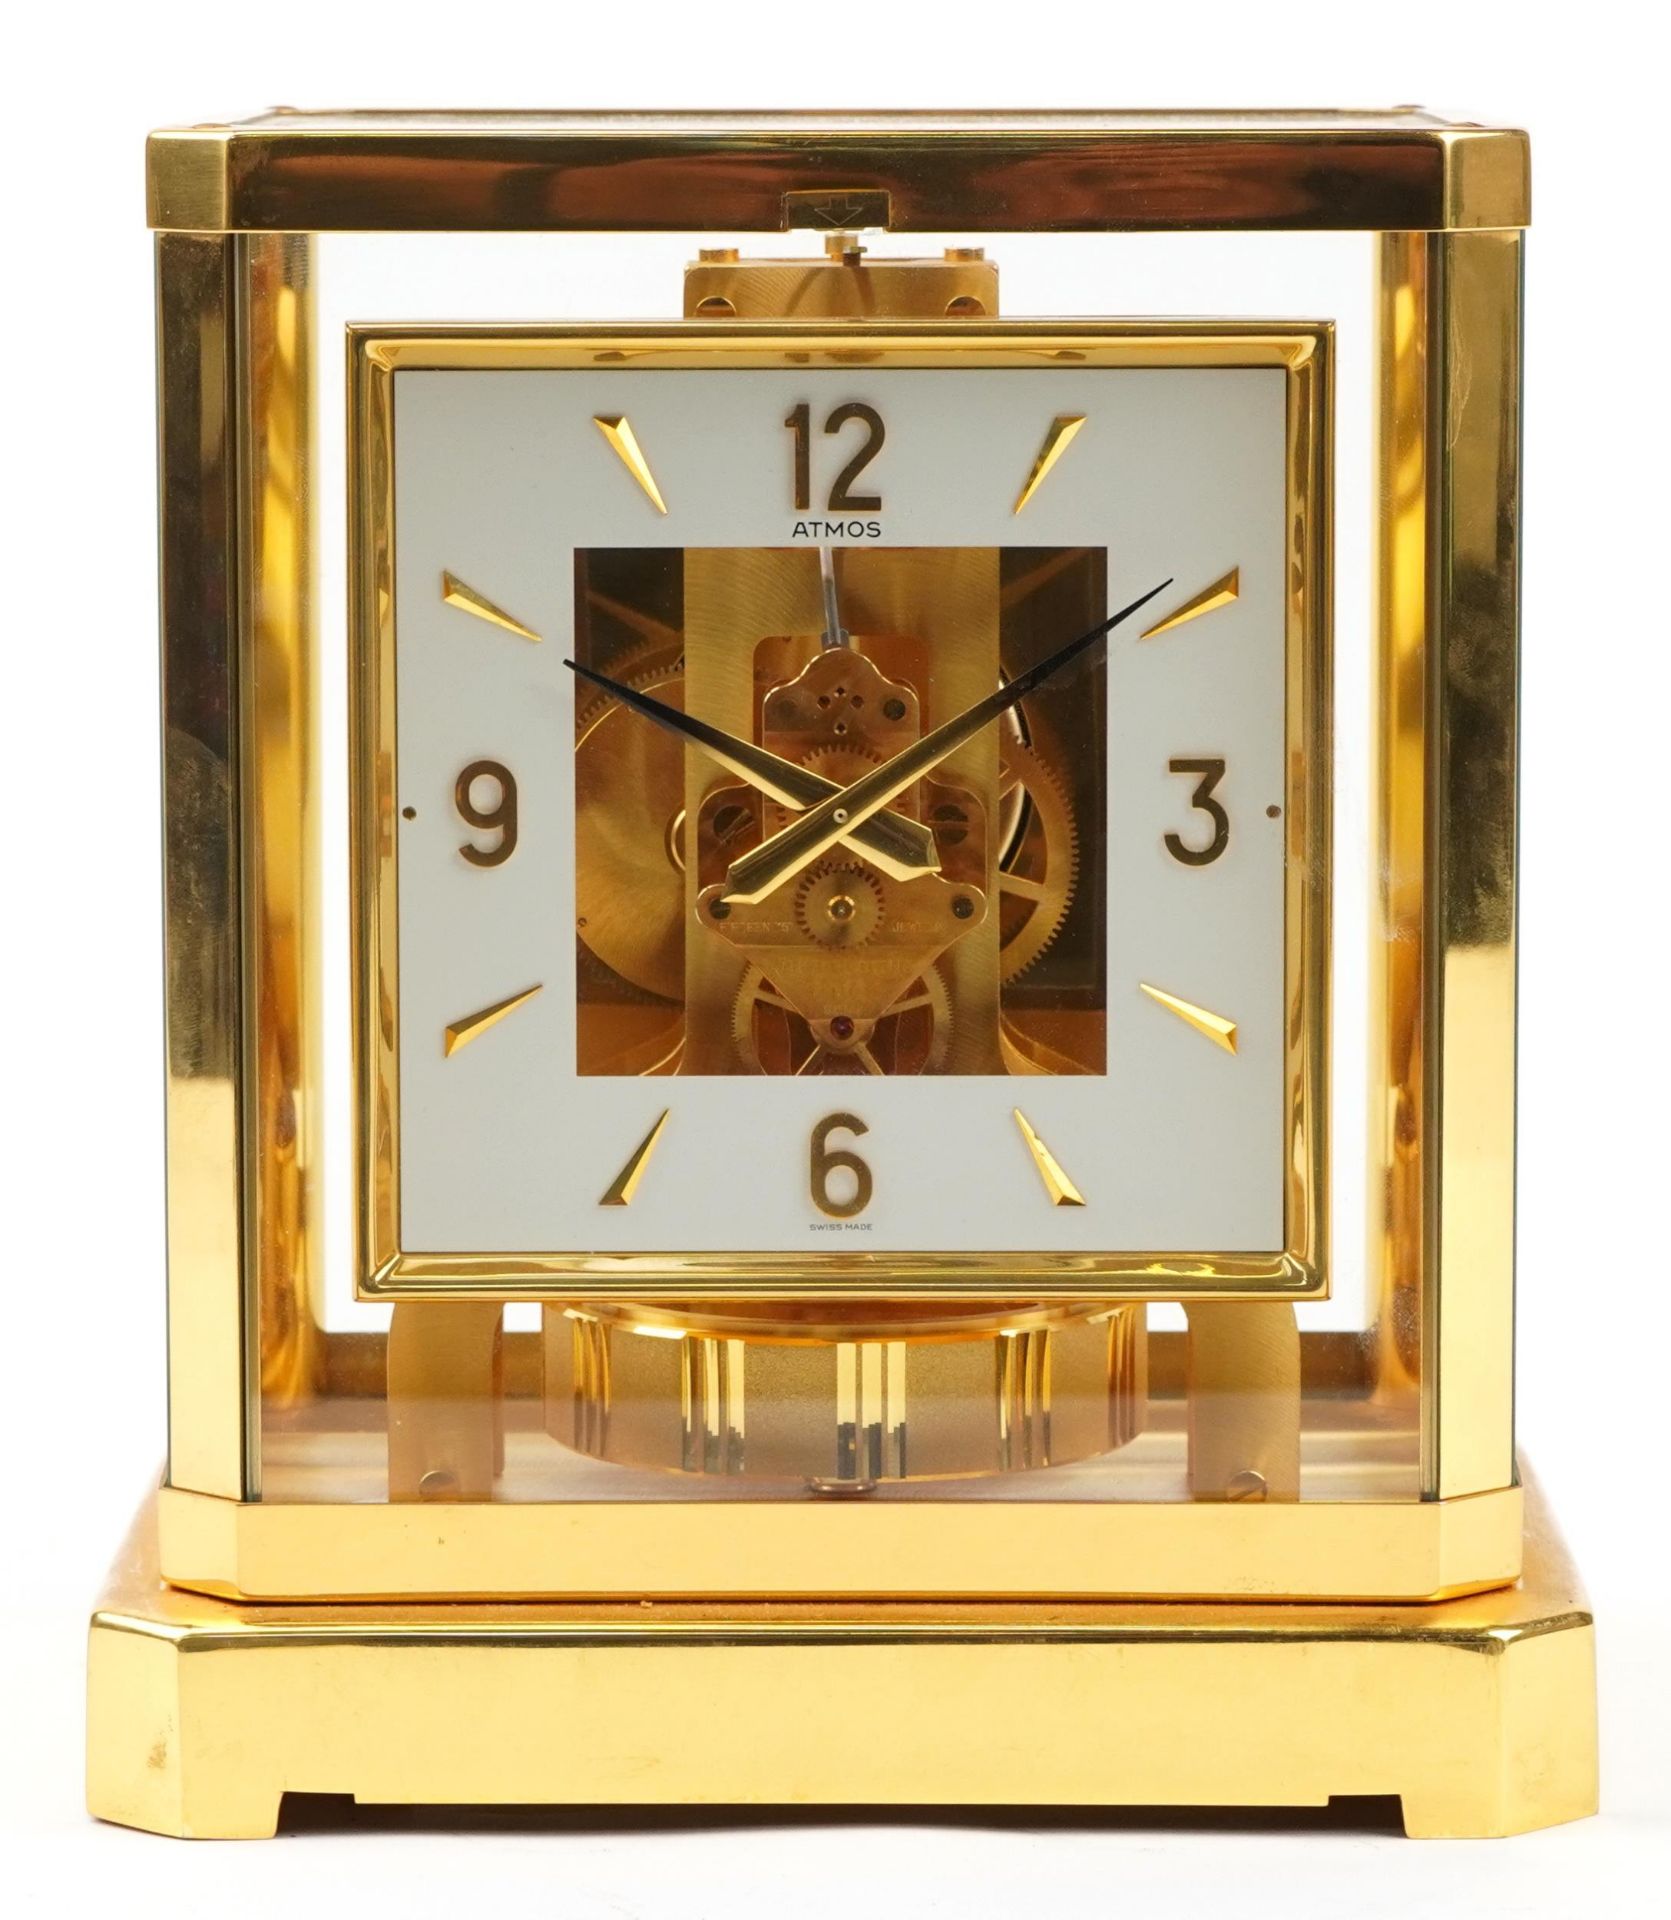 Jaeger LeCoultre brass cased Atmos clock, 23.5cm H x 20.5cm W x 17cm D : For further information - Image 2 of 5